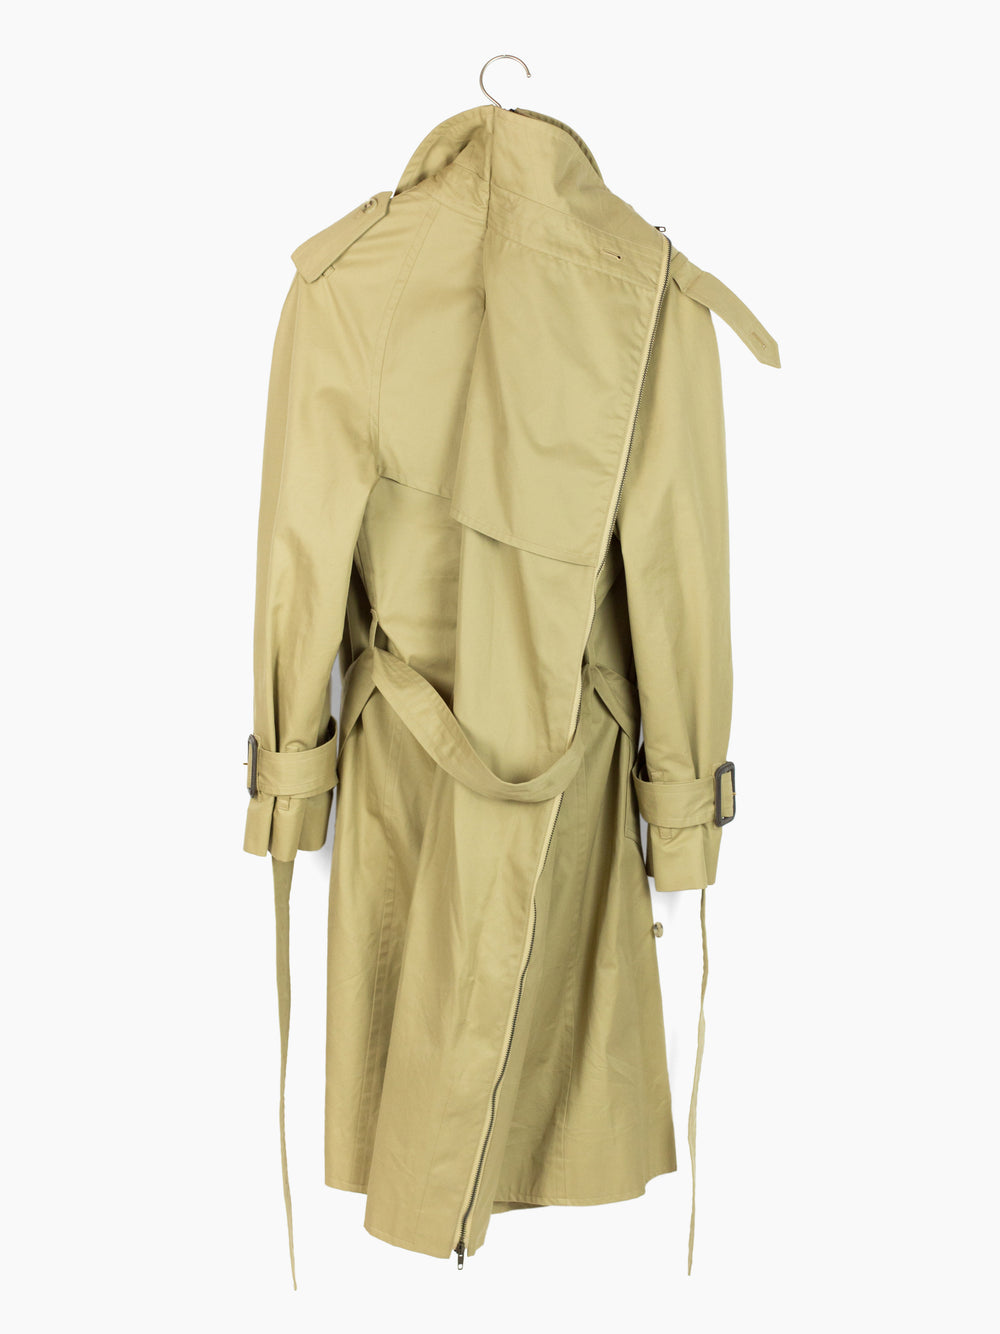 Vetements AW17 Mackintosh Convertible Trench